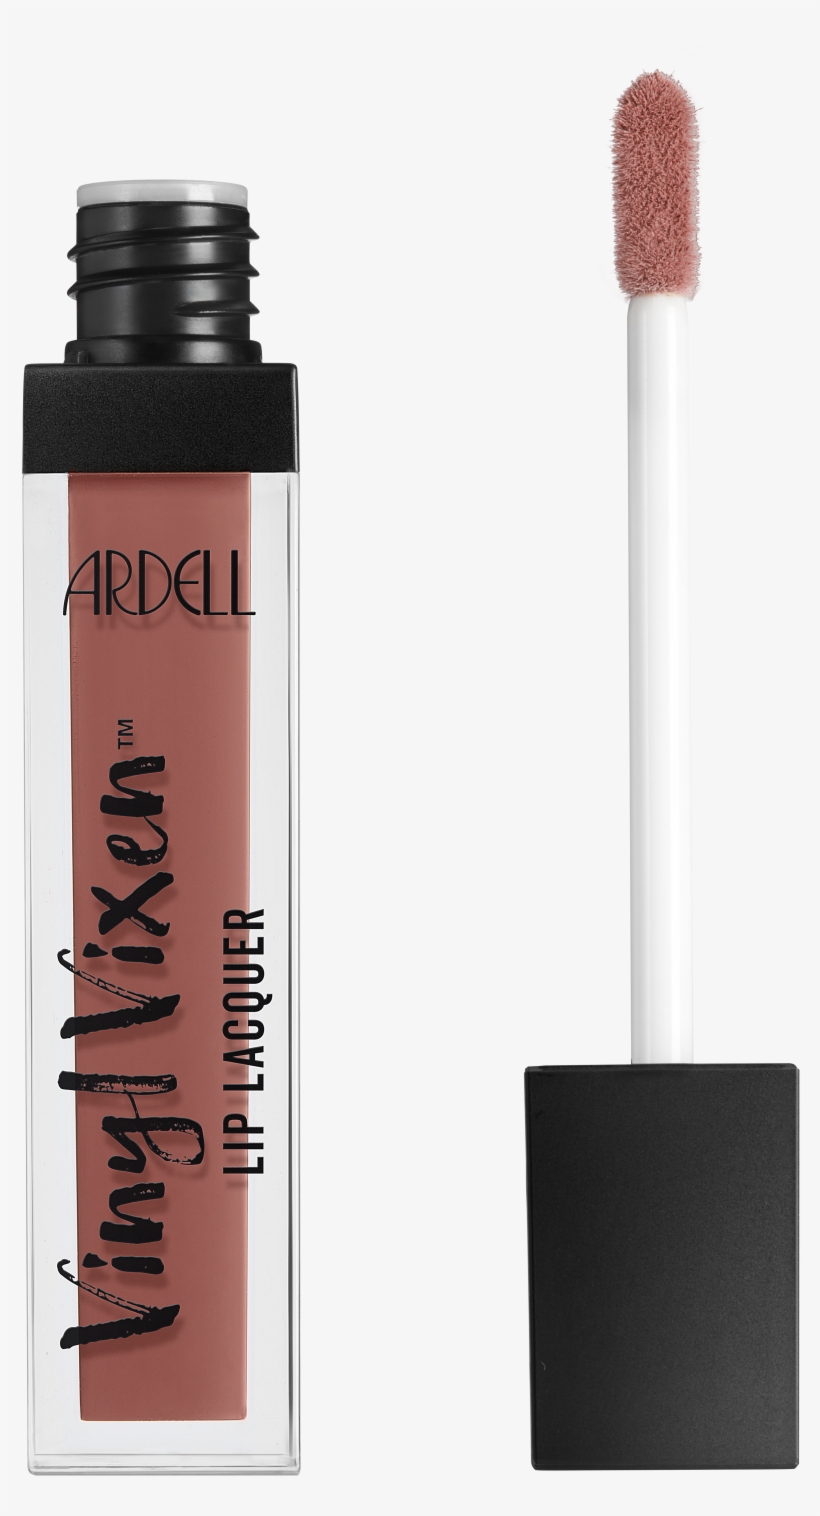 Vinyl Vixen Lip Lacquer Naked Bride By Ardell Beauty - Lipstick, transparent png #5175262